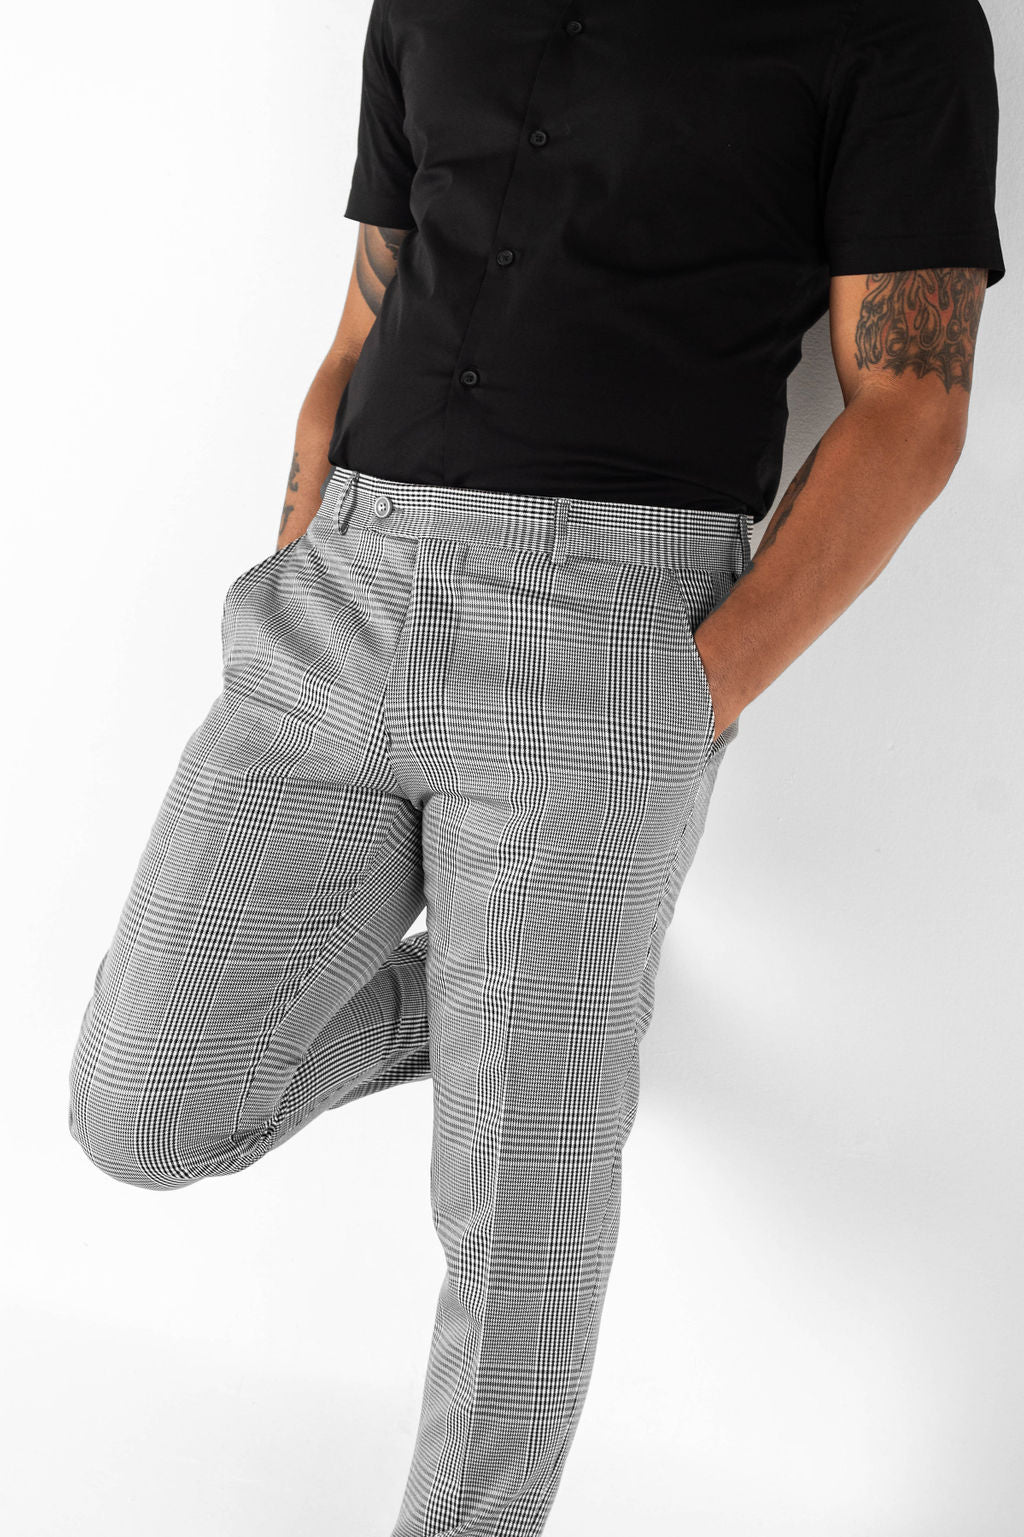 Plaid Chino Trousers Men Casual Business Formal Slim Fit Check Work Pants |  Fruugo KR